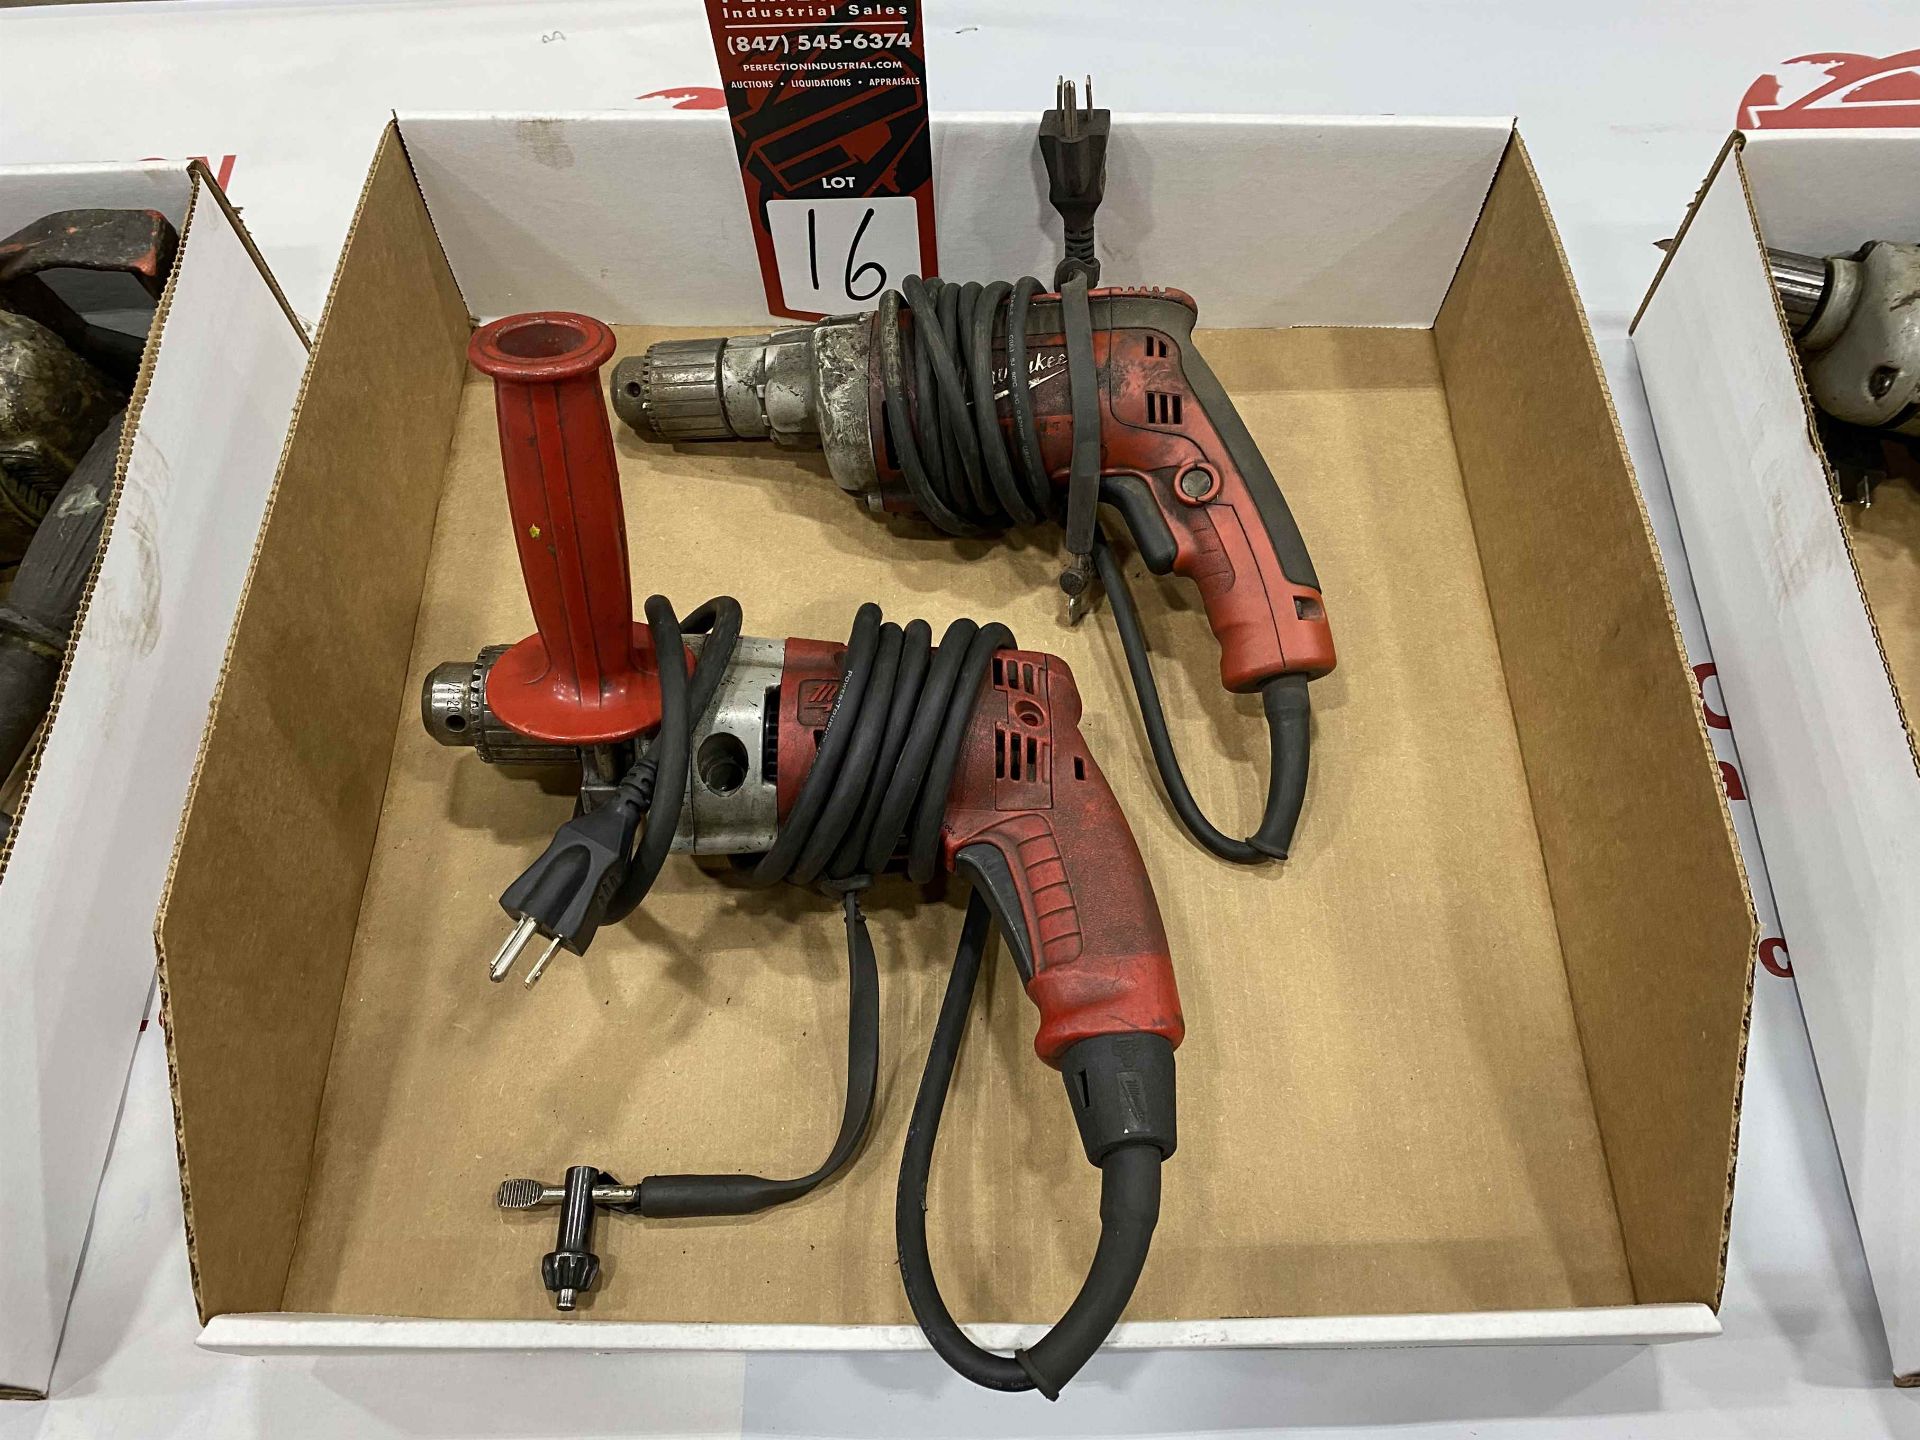 Lot Comprising (1) MILWAUKEE 3/8" Drill and (1) MILWAUKEE 1/2 " Drill